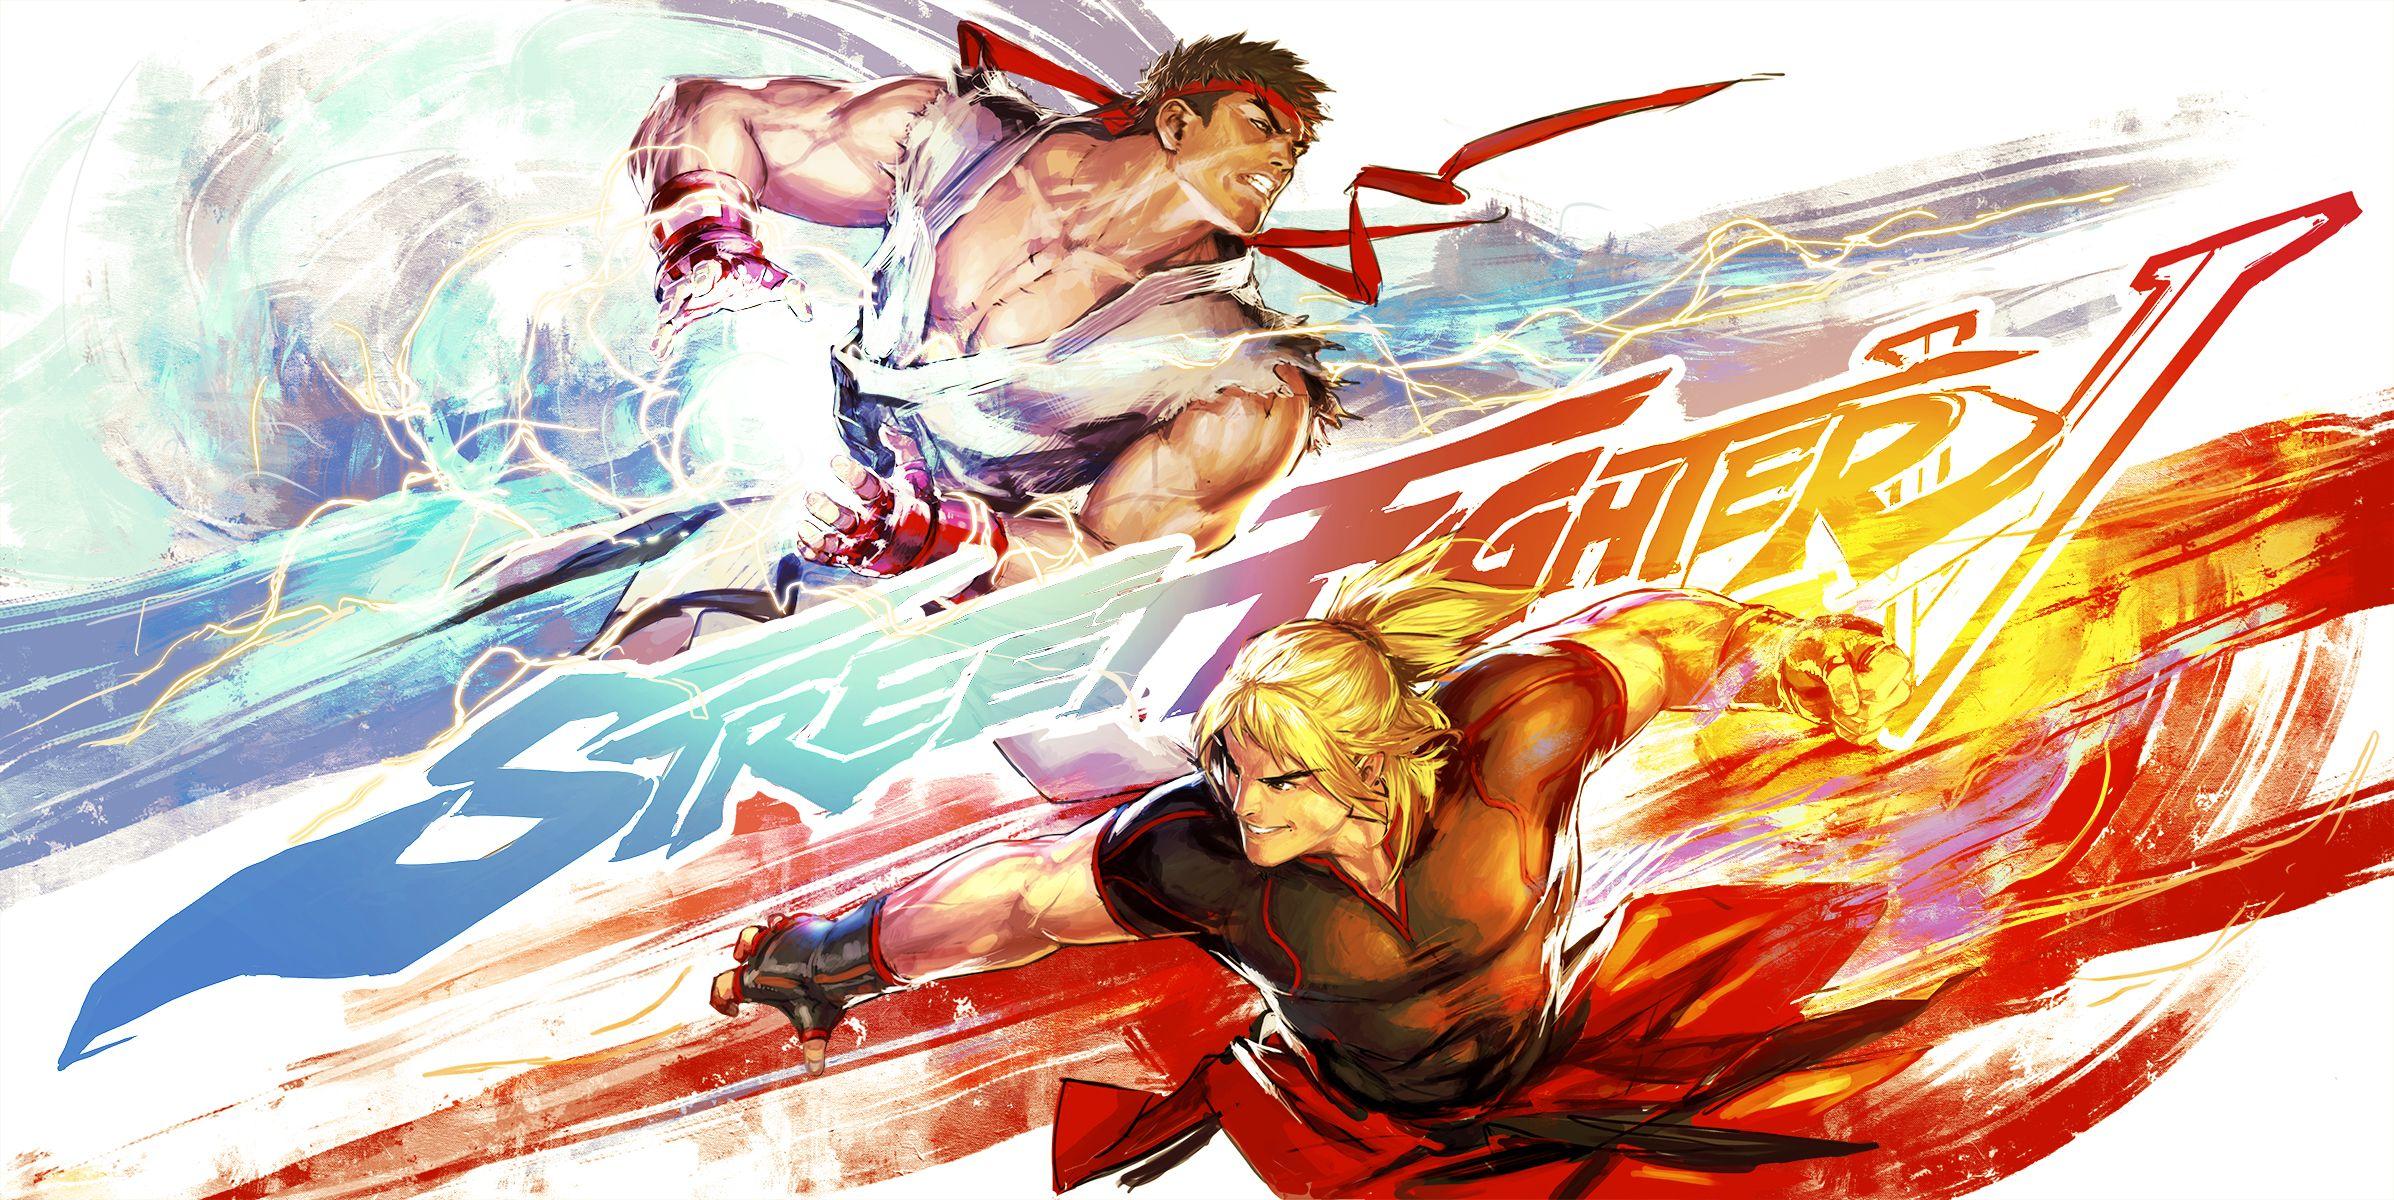 street fighter 5 game